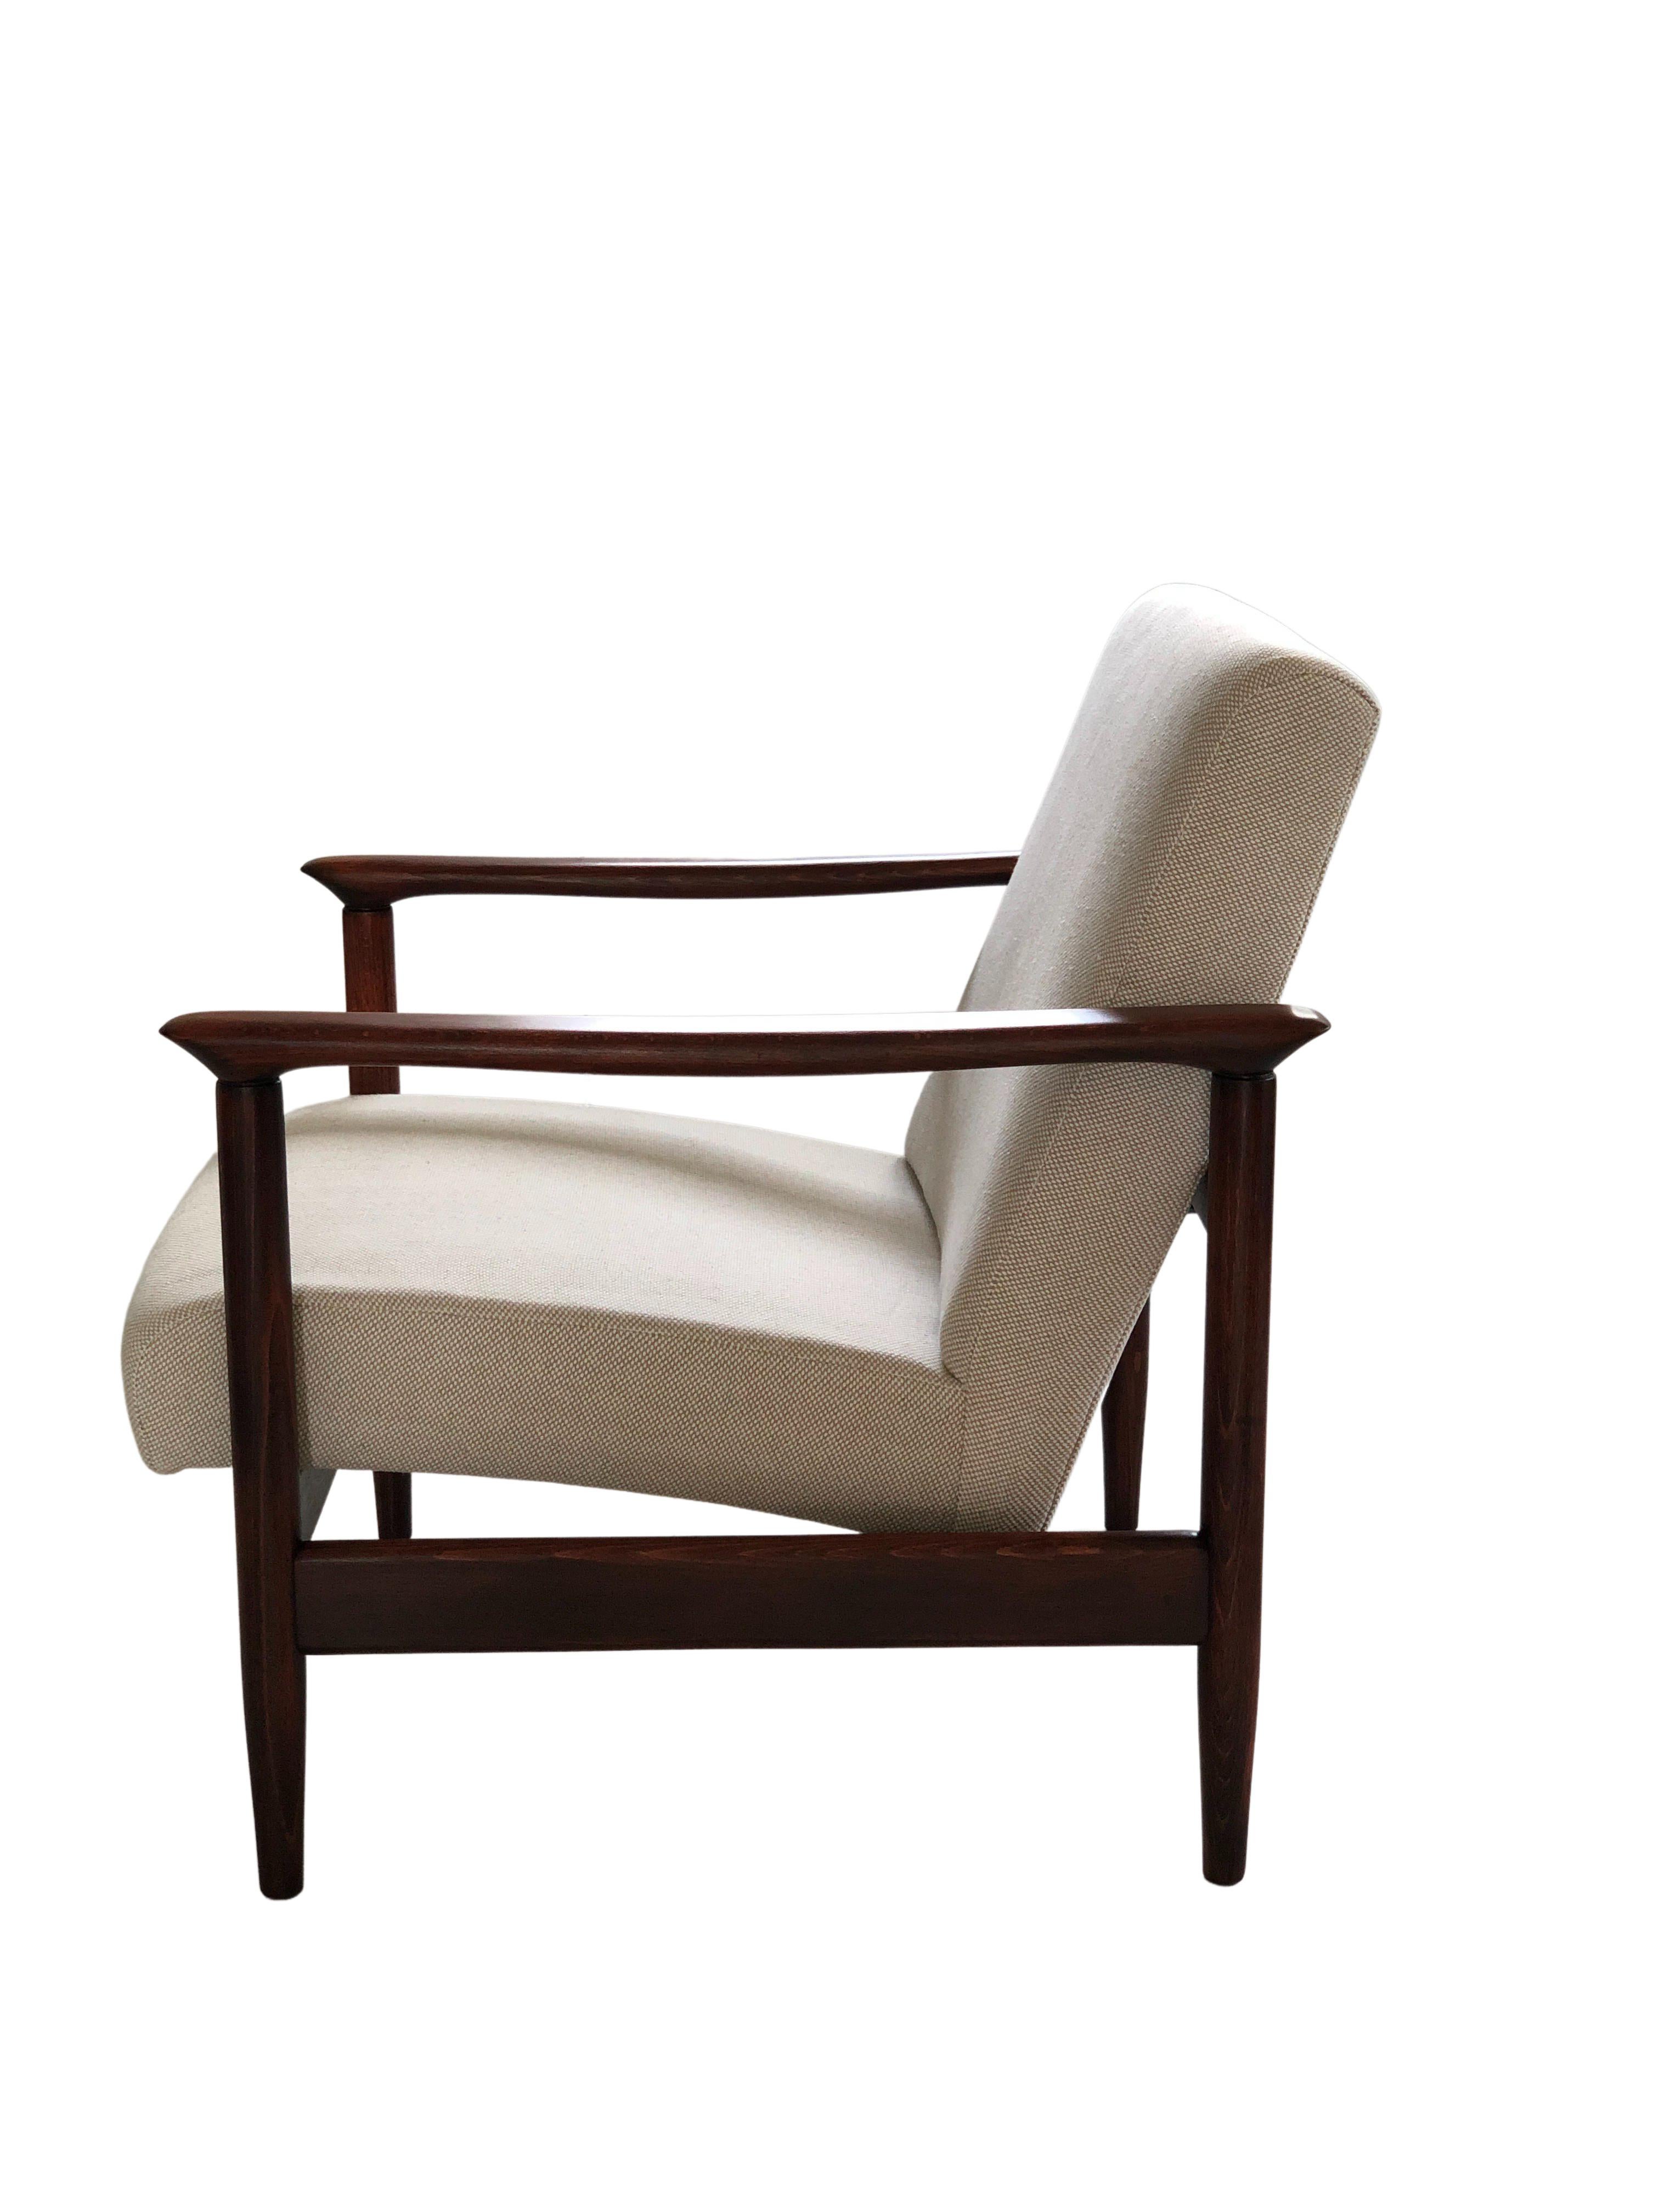 Hand-Crafted Mid Century Armchair, by Edmund Homa, in Beige Linen, 1960s